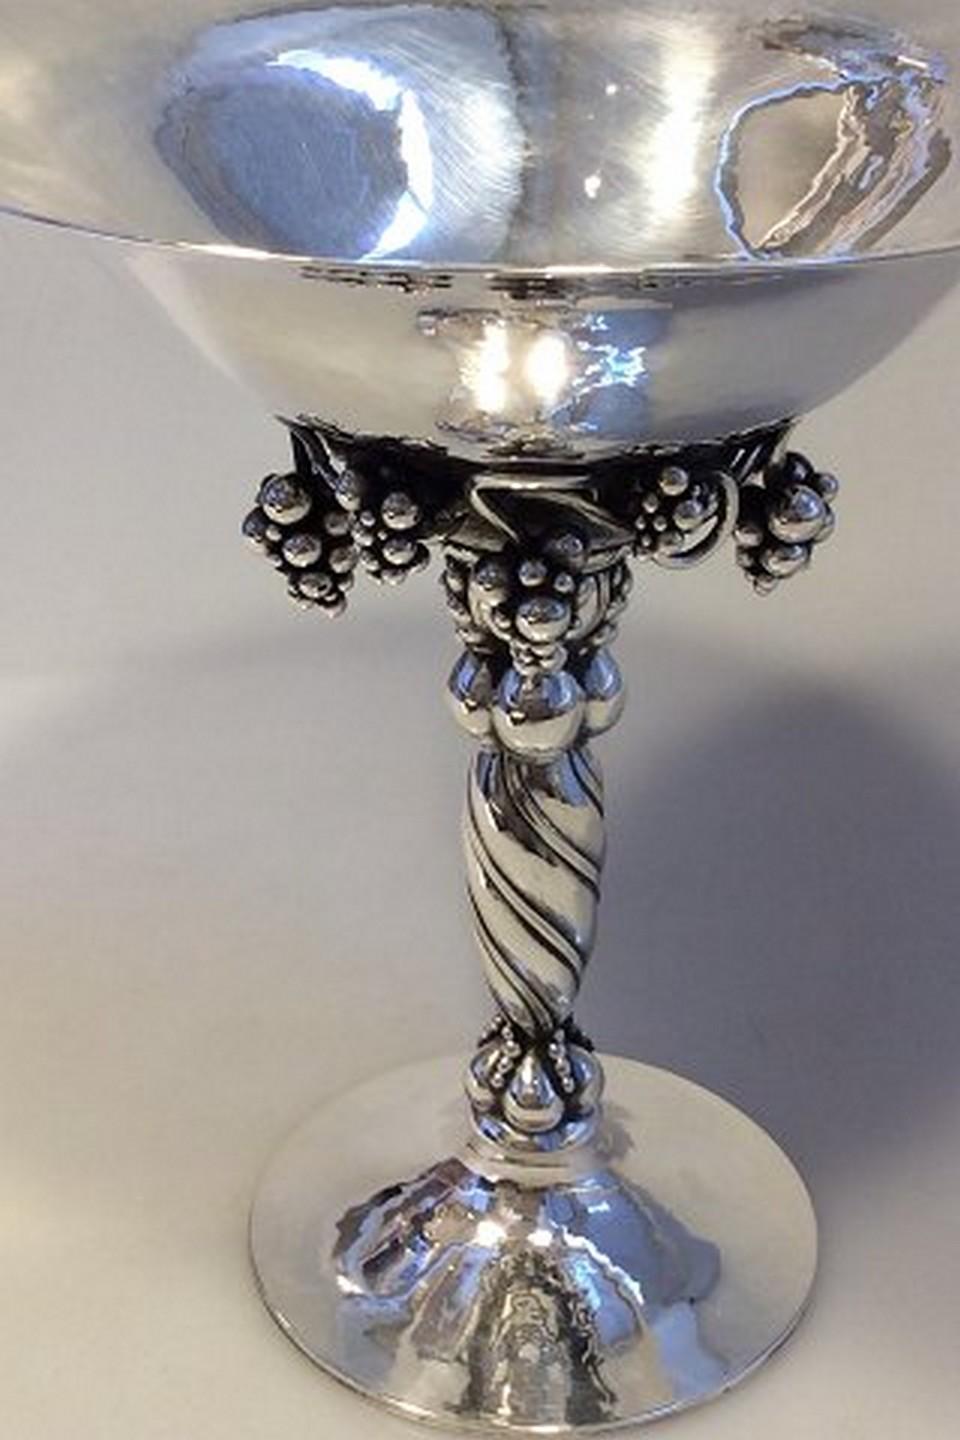 Georg Jensen sterling silver grape bowl no. 263B.
Measures: 19 cm / 7 31/64 in. x 18.5 cm / 7 9/32 in. diameter
Weight is 519 g / 18.30 oz.
Marked with marks from 1925-1932 and French import marks.
Item no.: 395907.